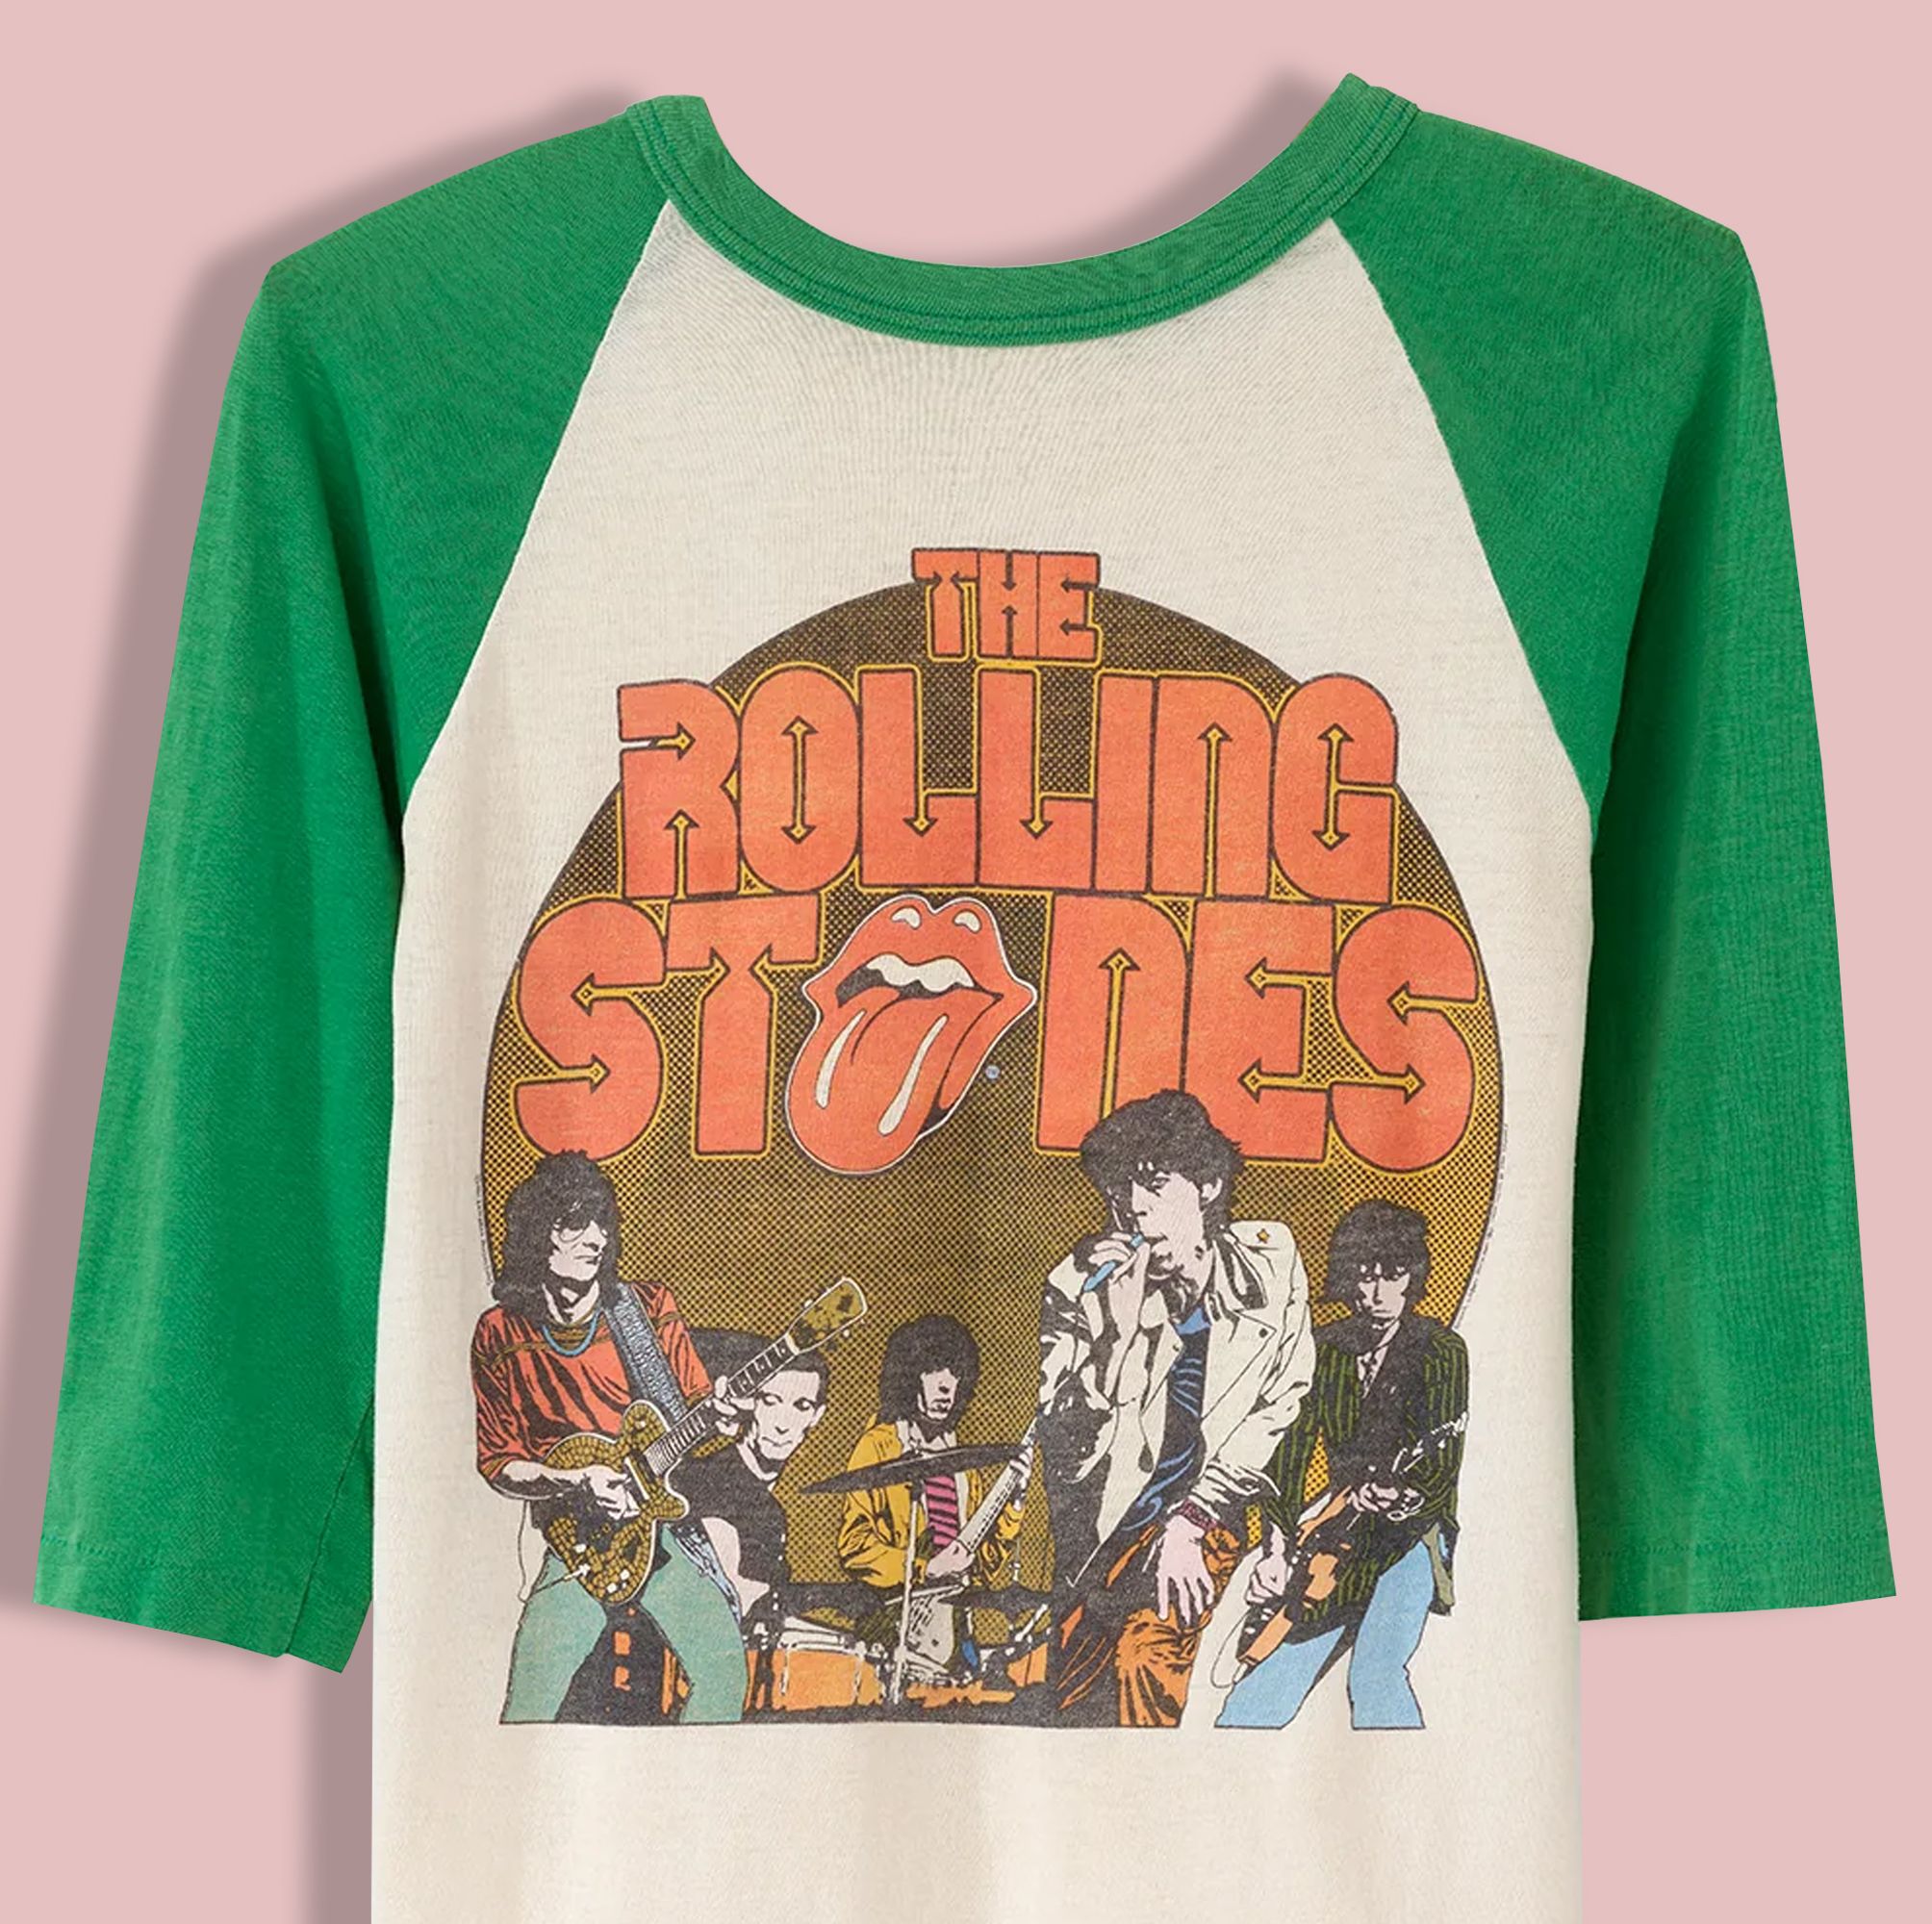 The 13 Best Places to Buy Vintage T-Shirts